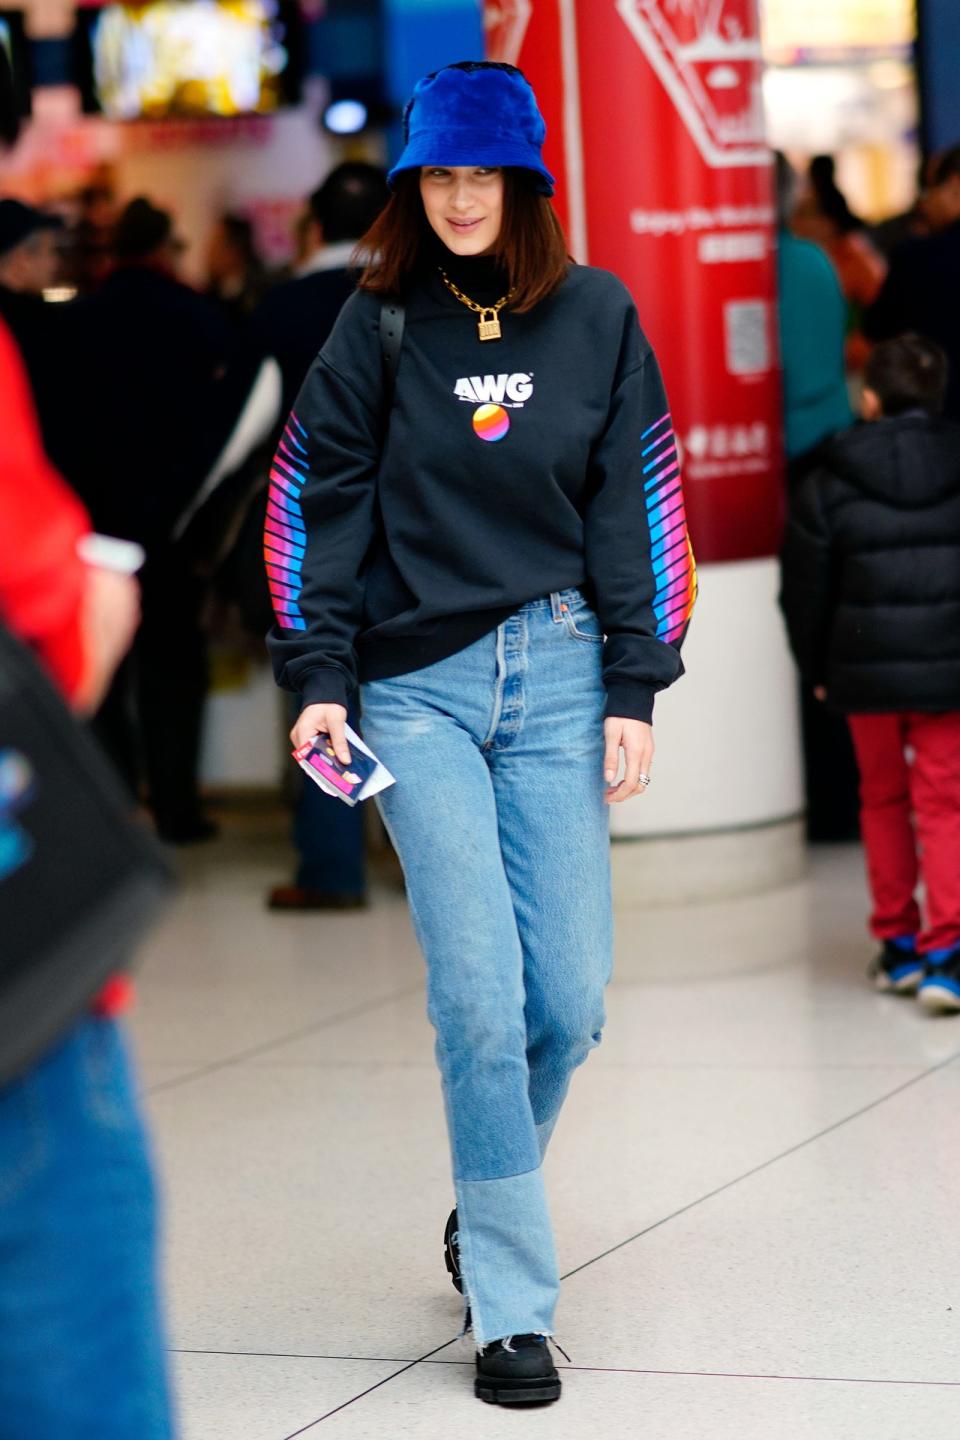 Not every trip needs to be a style moment—even Bella Hadid keeps it simple with a graphic hoodie and jeans.